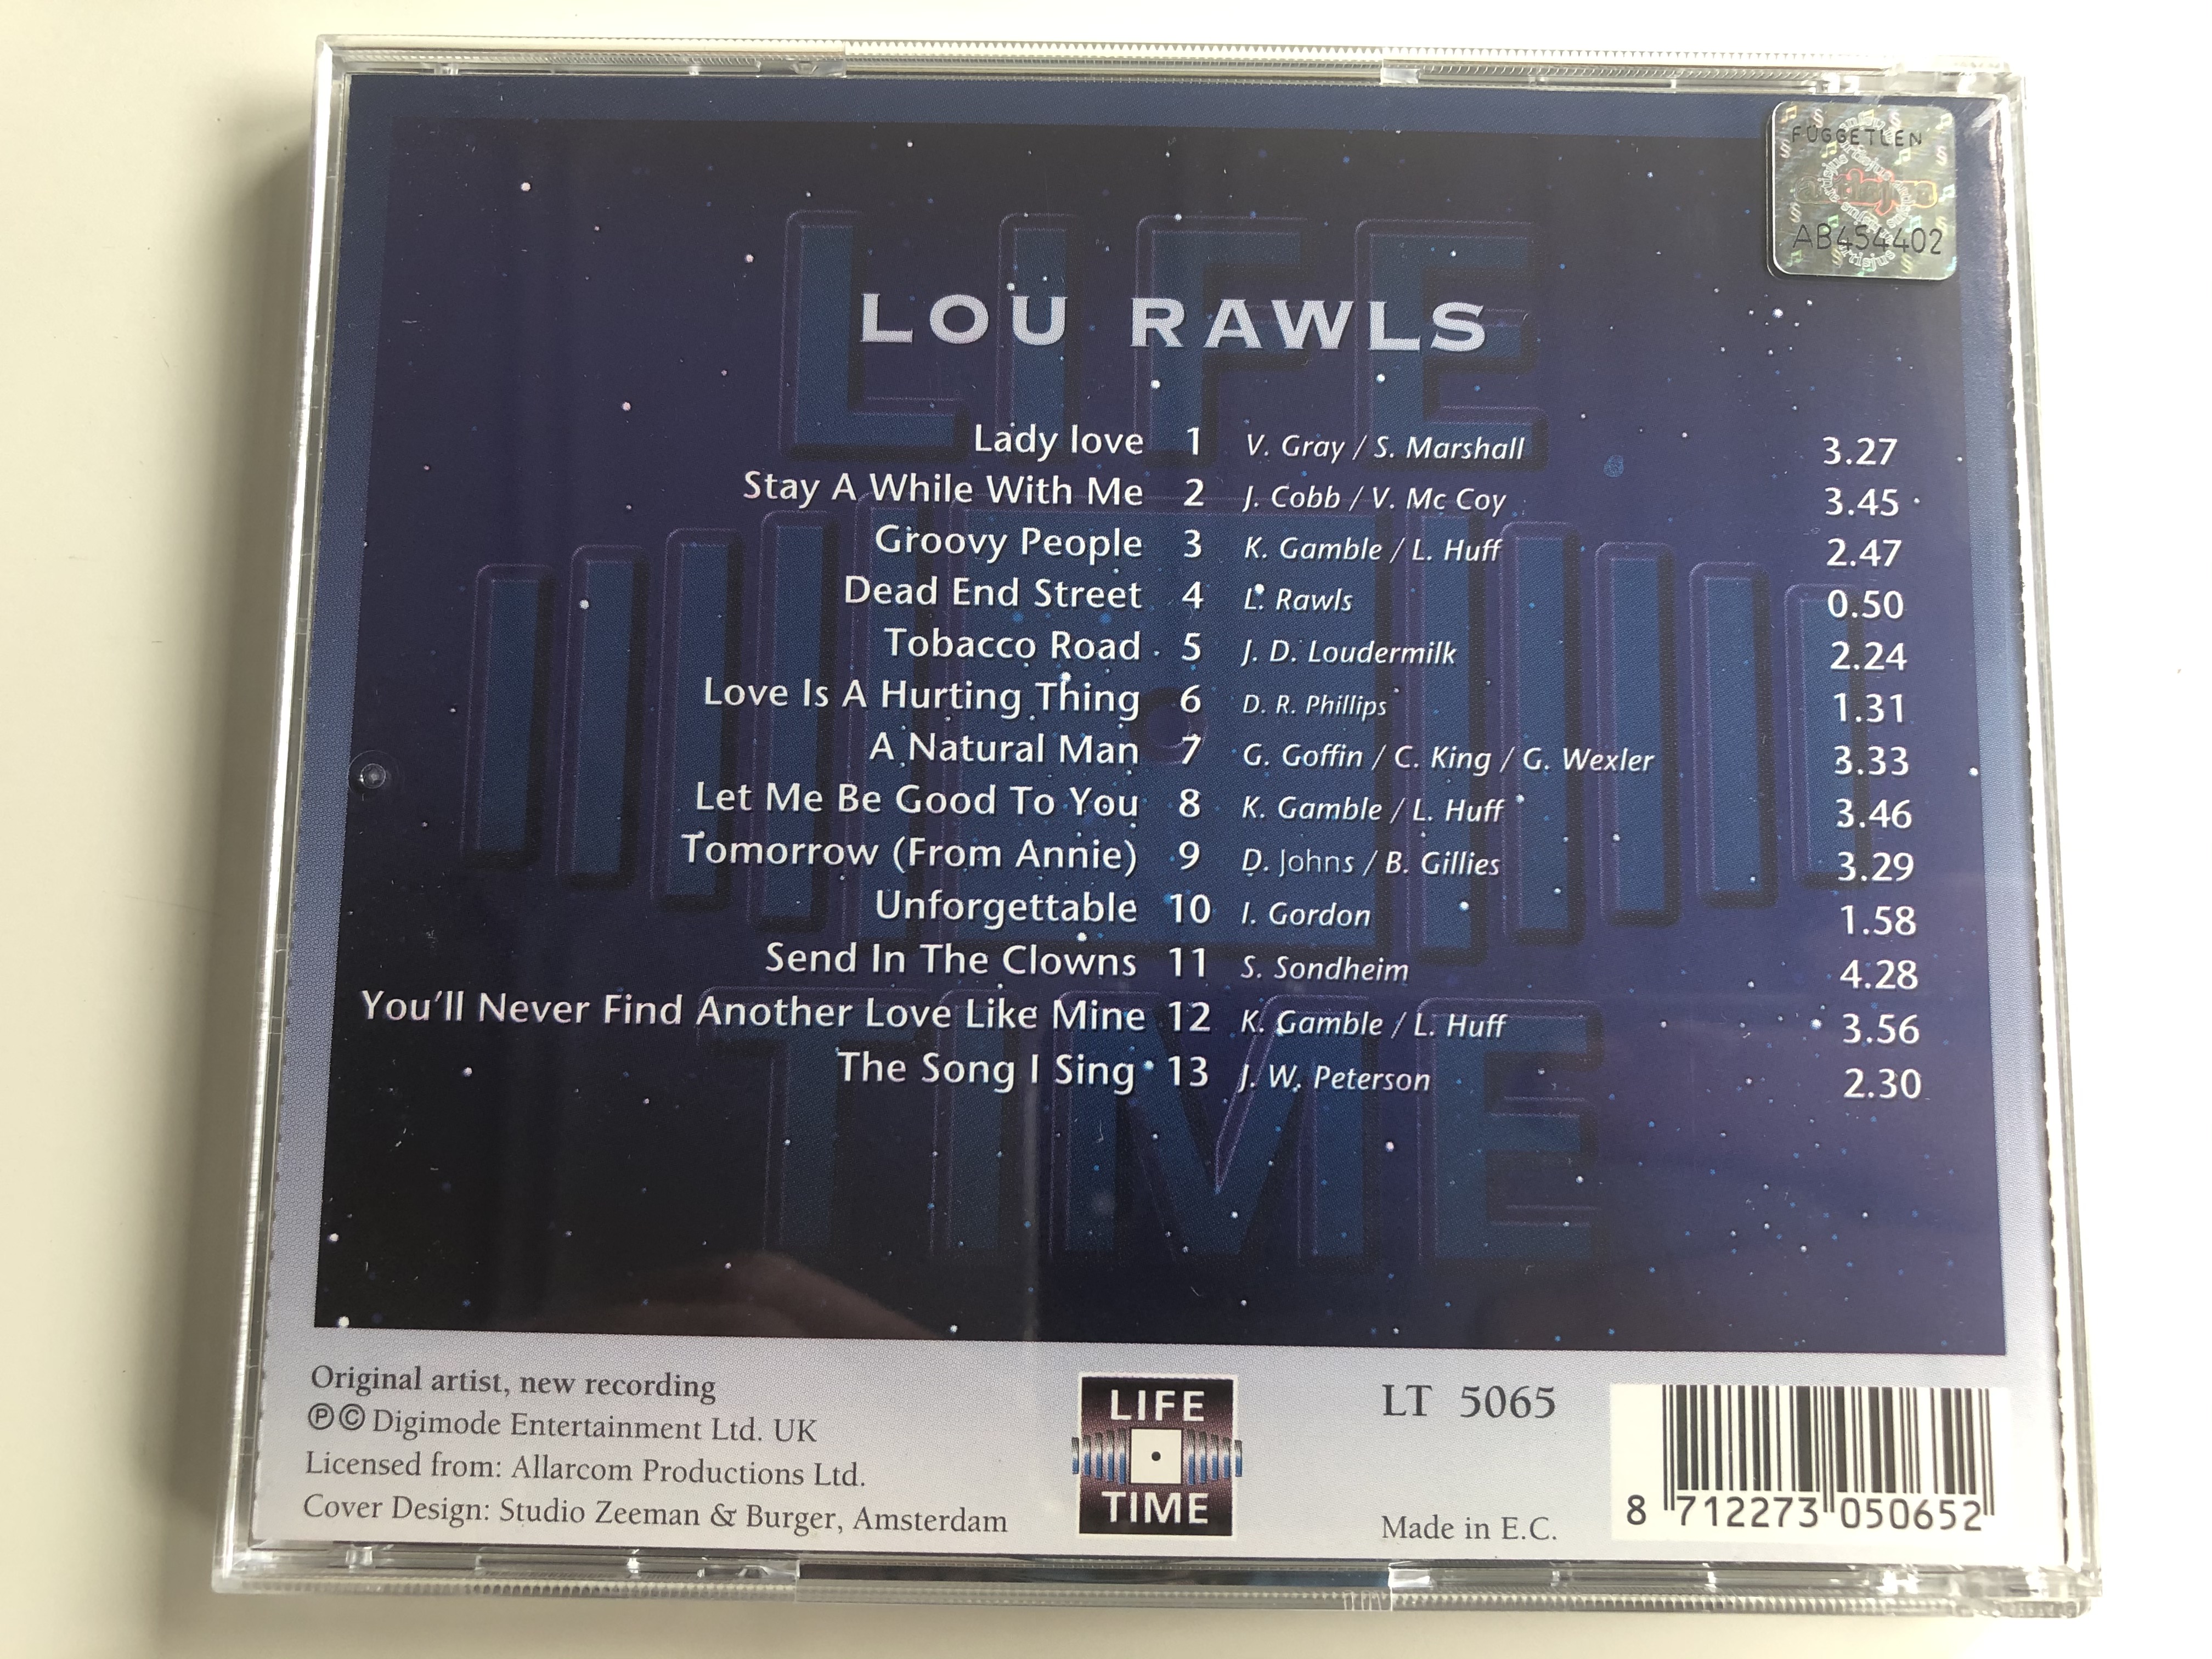 lou-rawls-lady-love-you-ll-never-find-another-love-like-mine-send-in-the-clowns-a-natural-man-life-time-audio-cd-lt-5065-4-.jpg